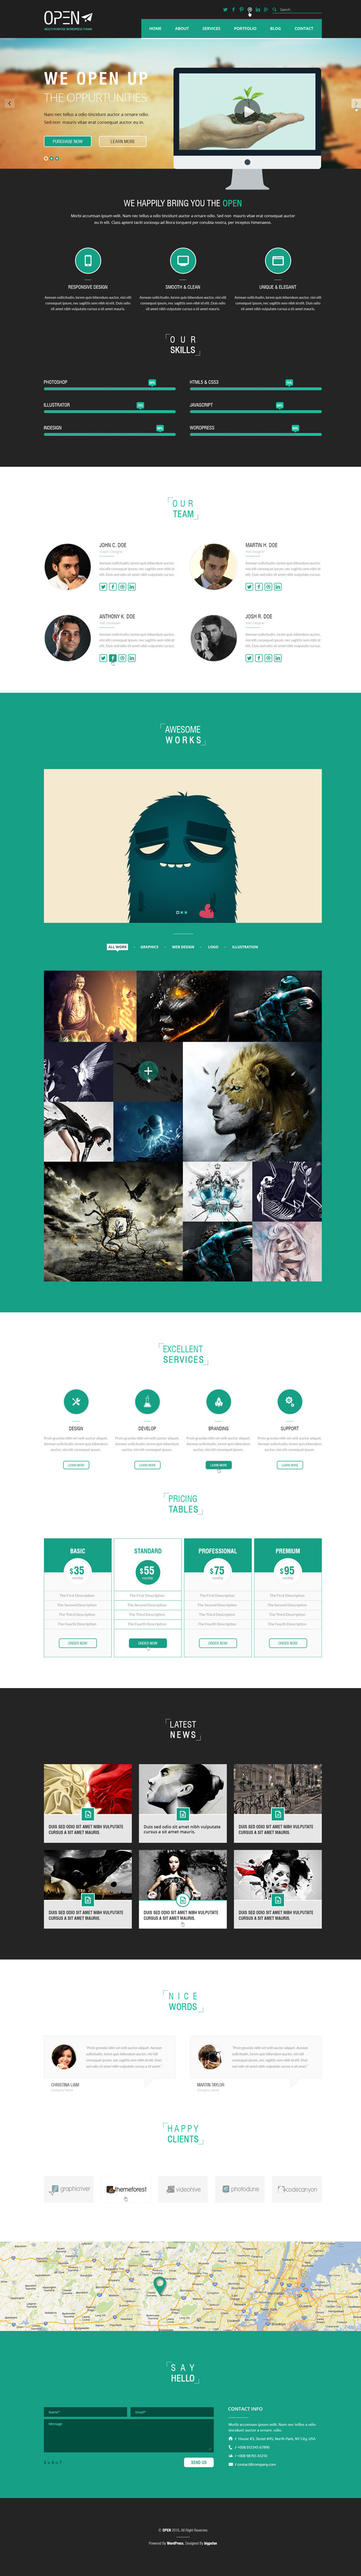 Open - Responsive Corporate and Business Template